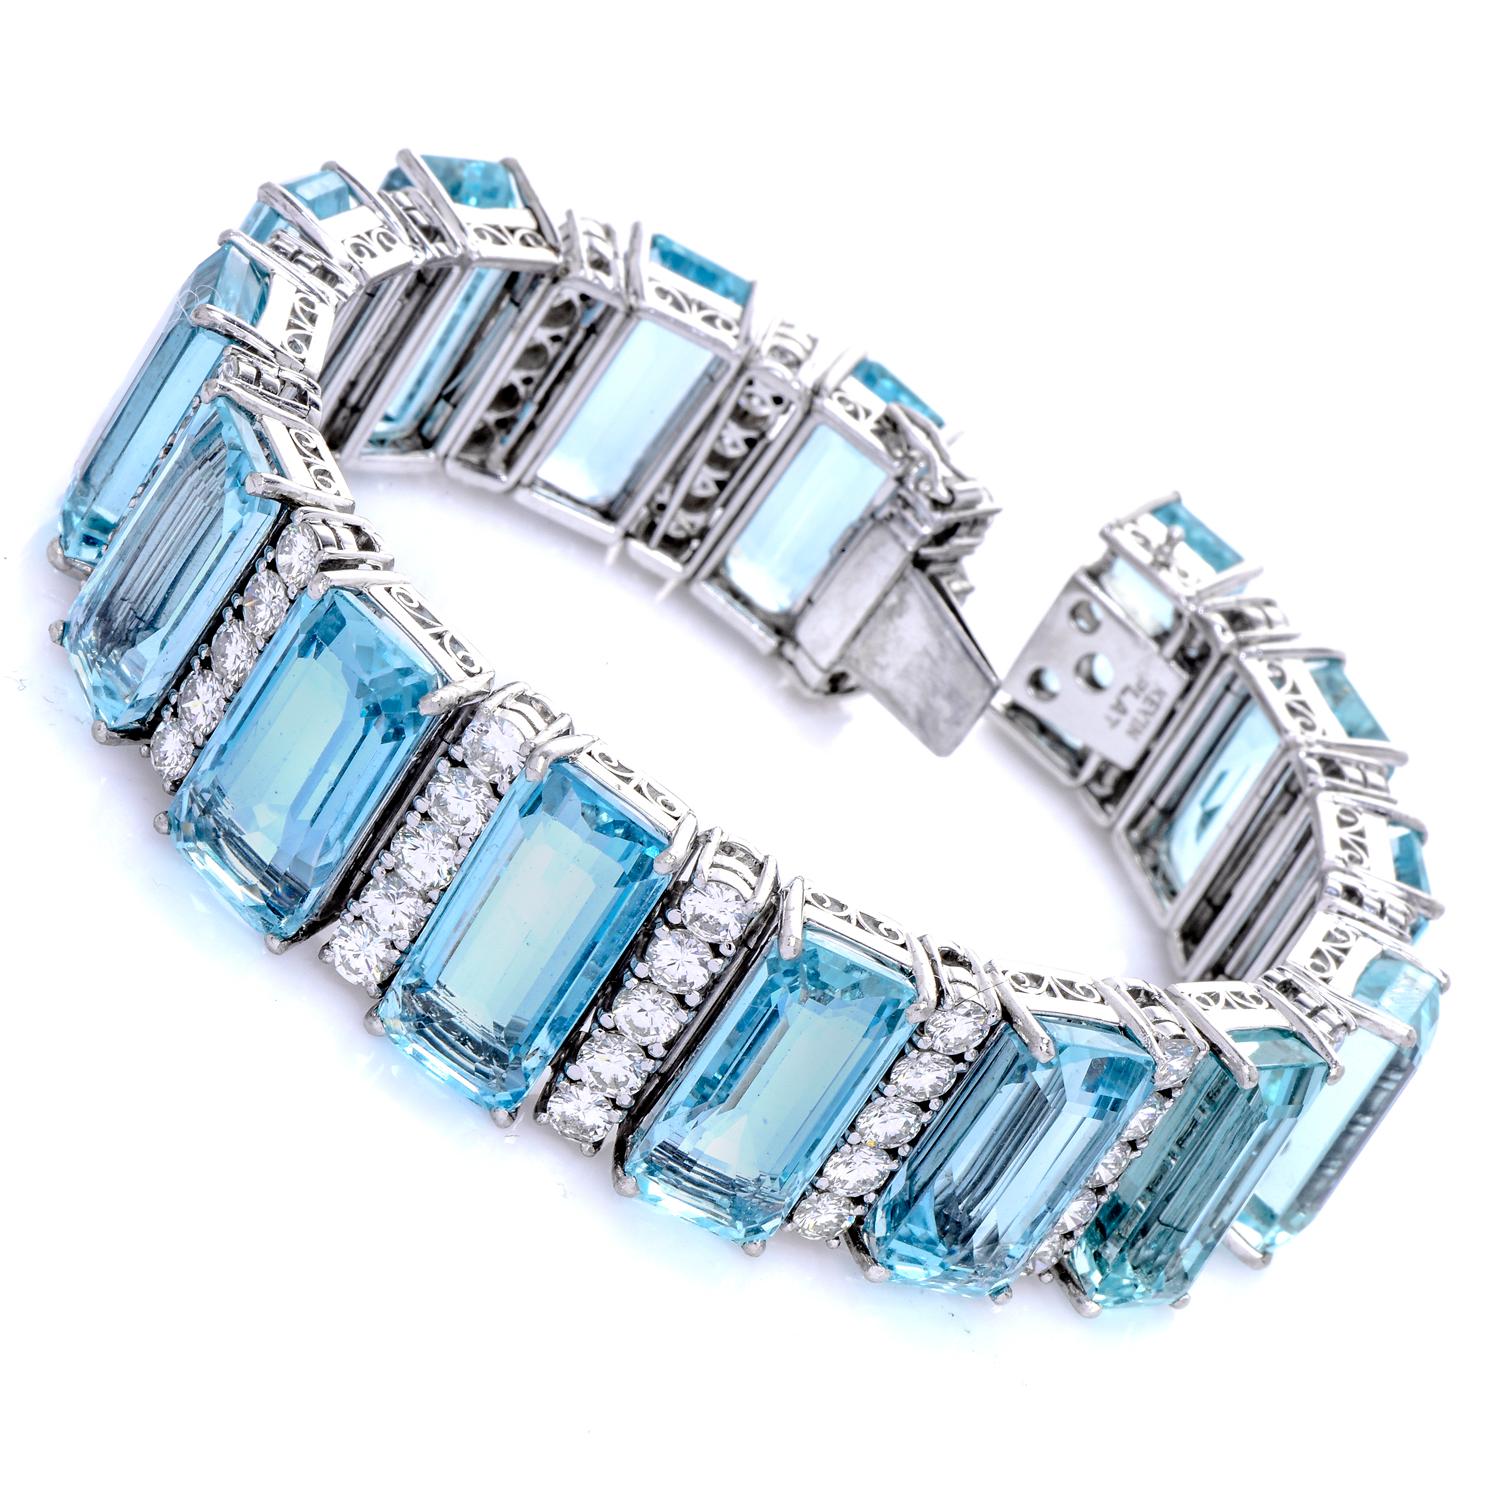 The waves of the sea reflected on high-quality Aquamarines!

This stunning vintage aquamarine and diamond bracelet is crafted in Luxurious Platinum.

Its design features 15 well-matched high-quality genuine emerald cut shaped genuine

Aquamarine